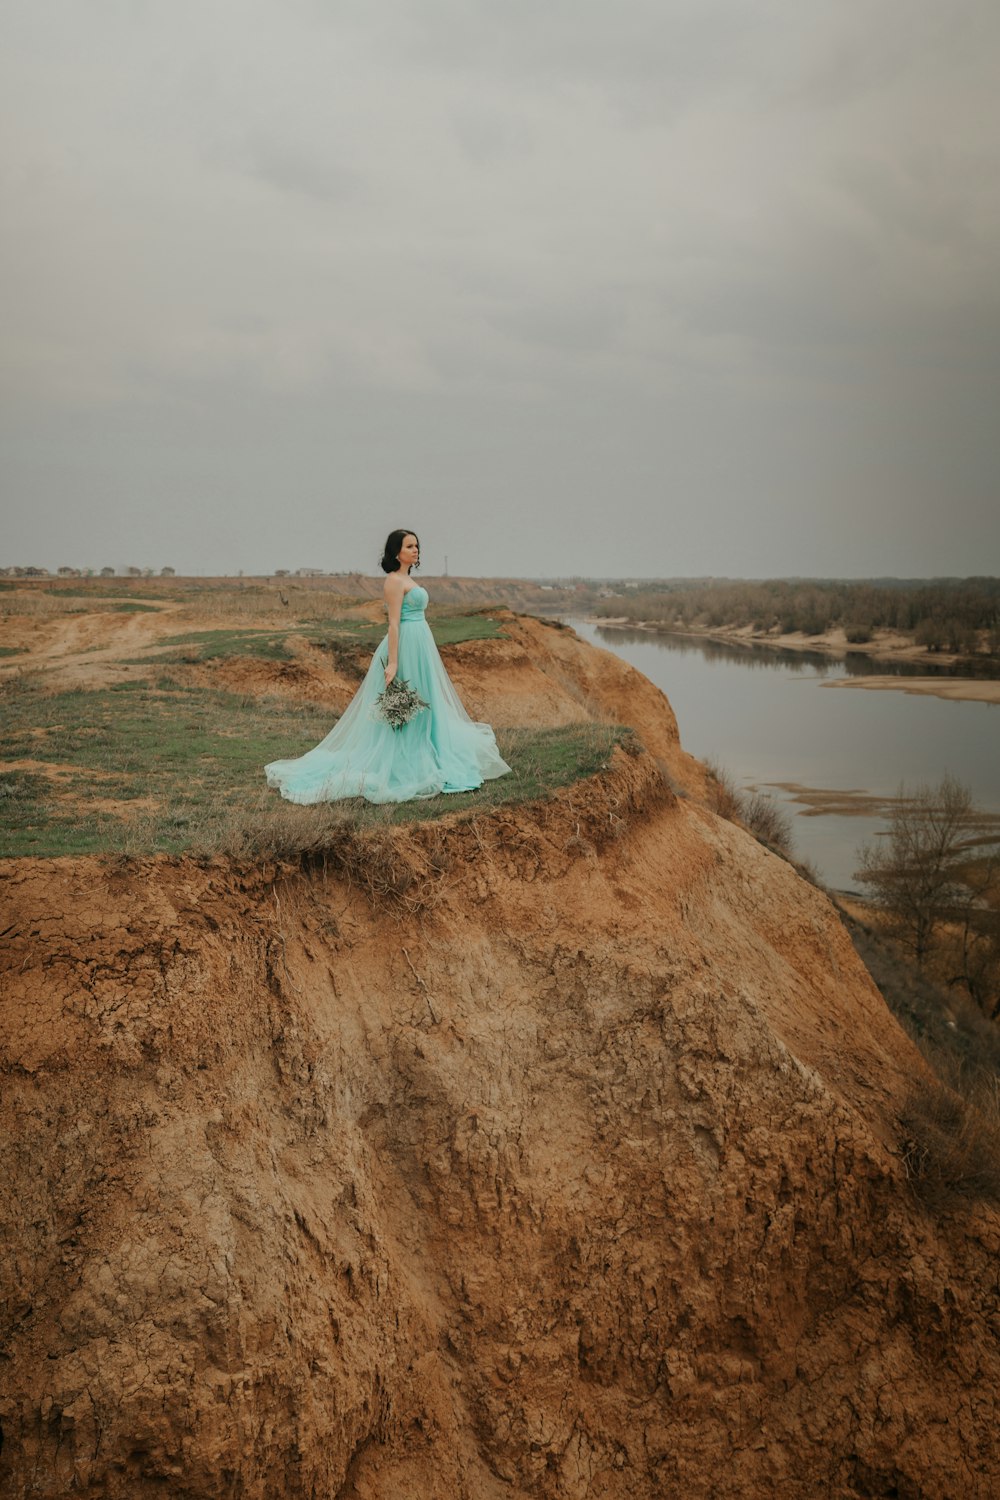 woman in white wedding dress standing on brown field near lake during daytime